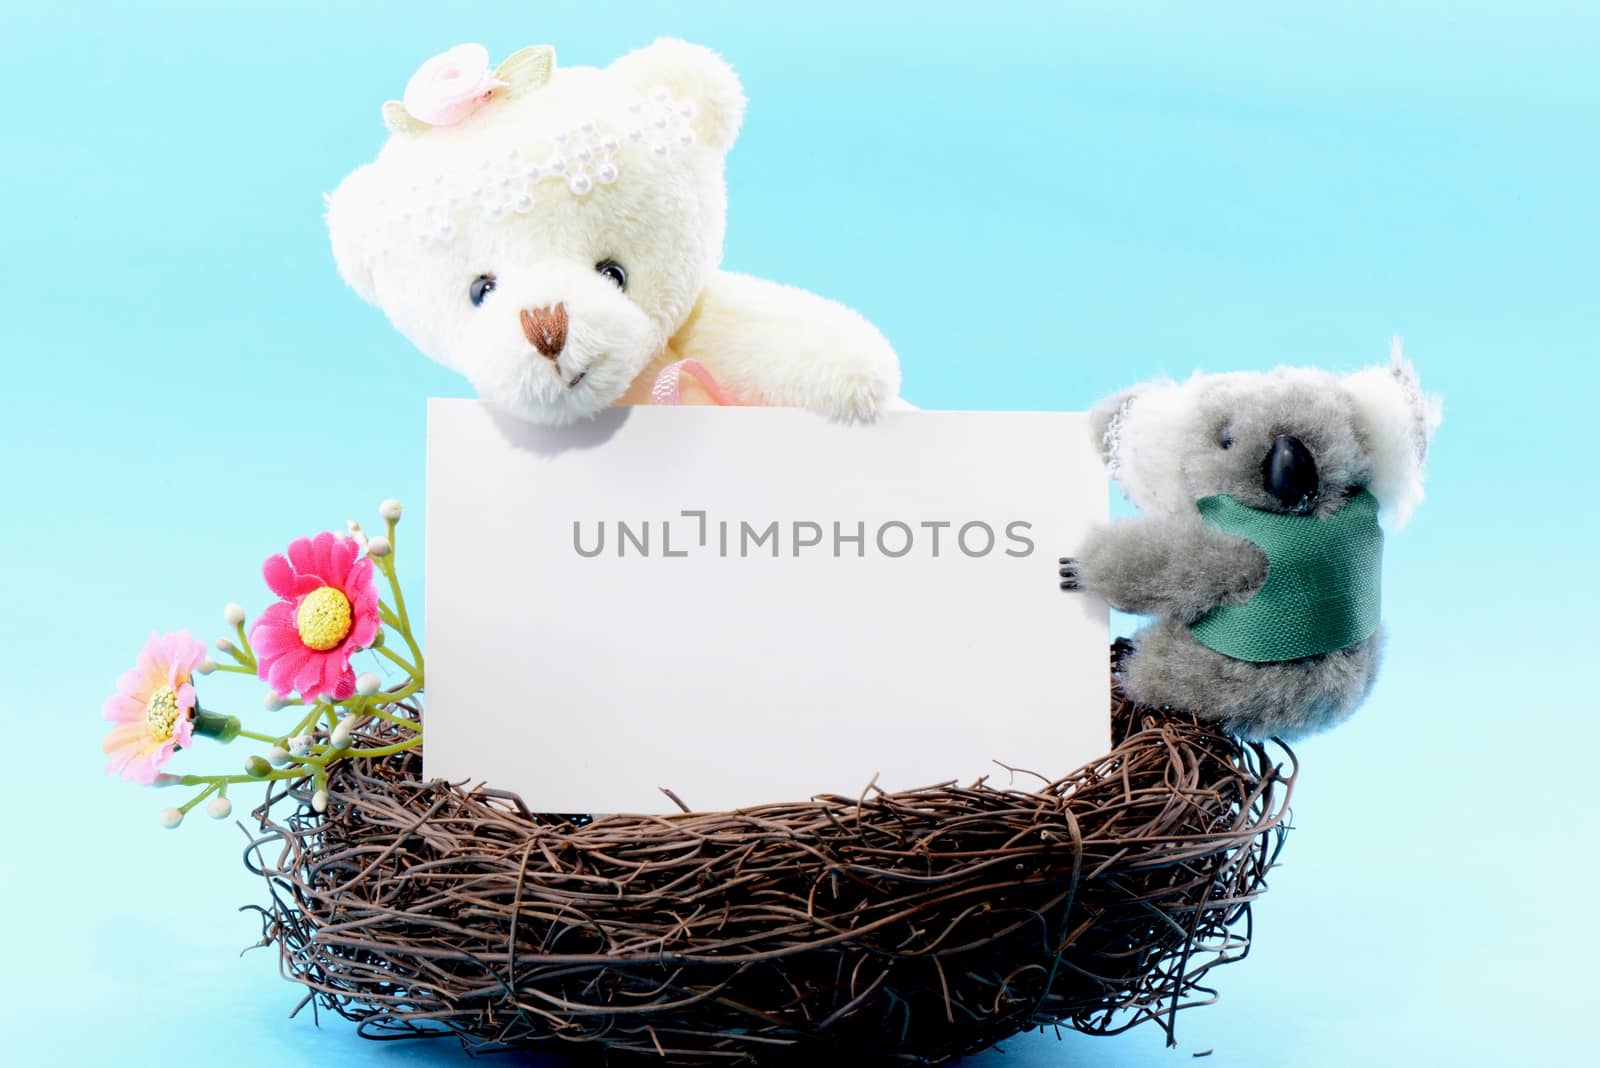 Nest with a blank white card held by a toy teddy bear and koala on a blue background